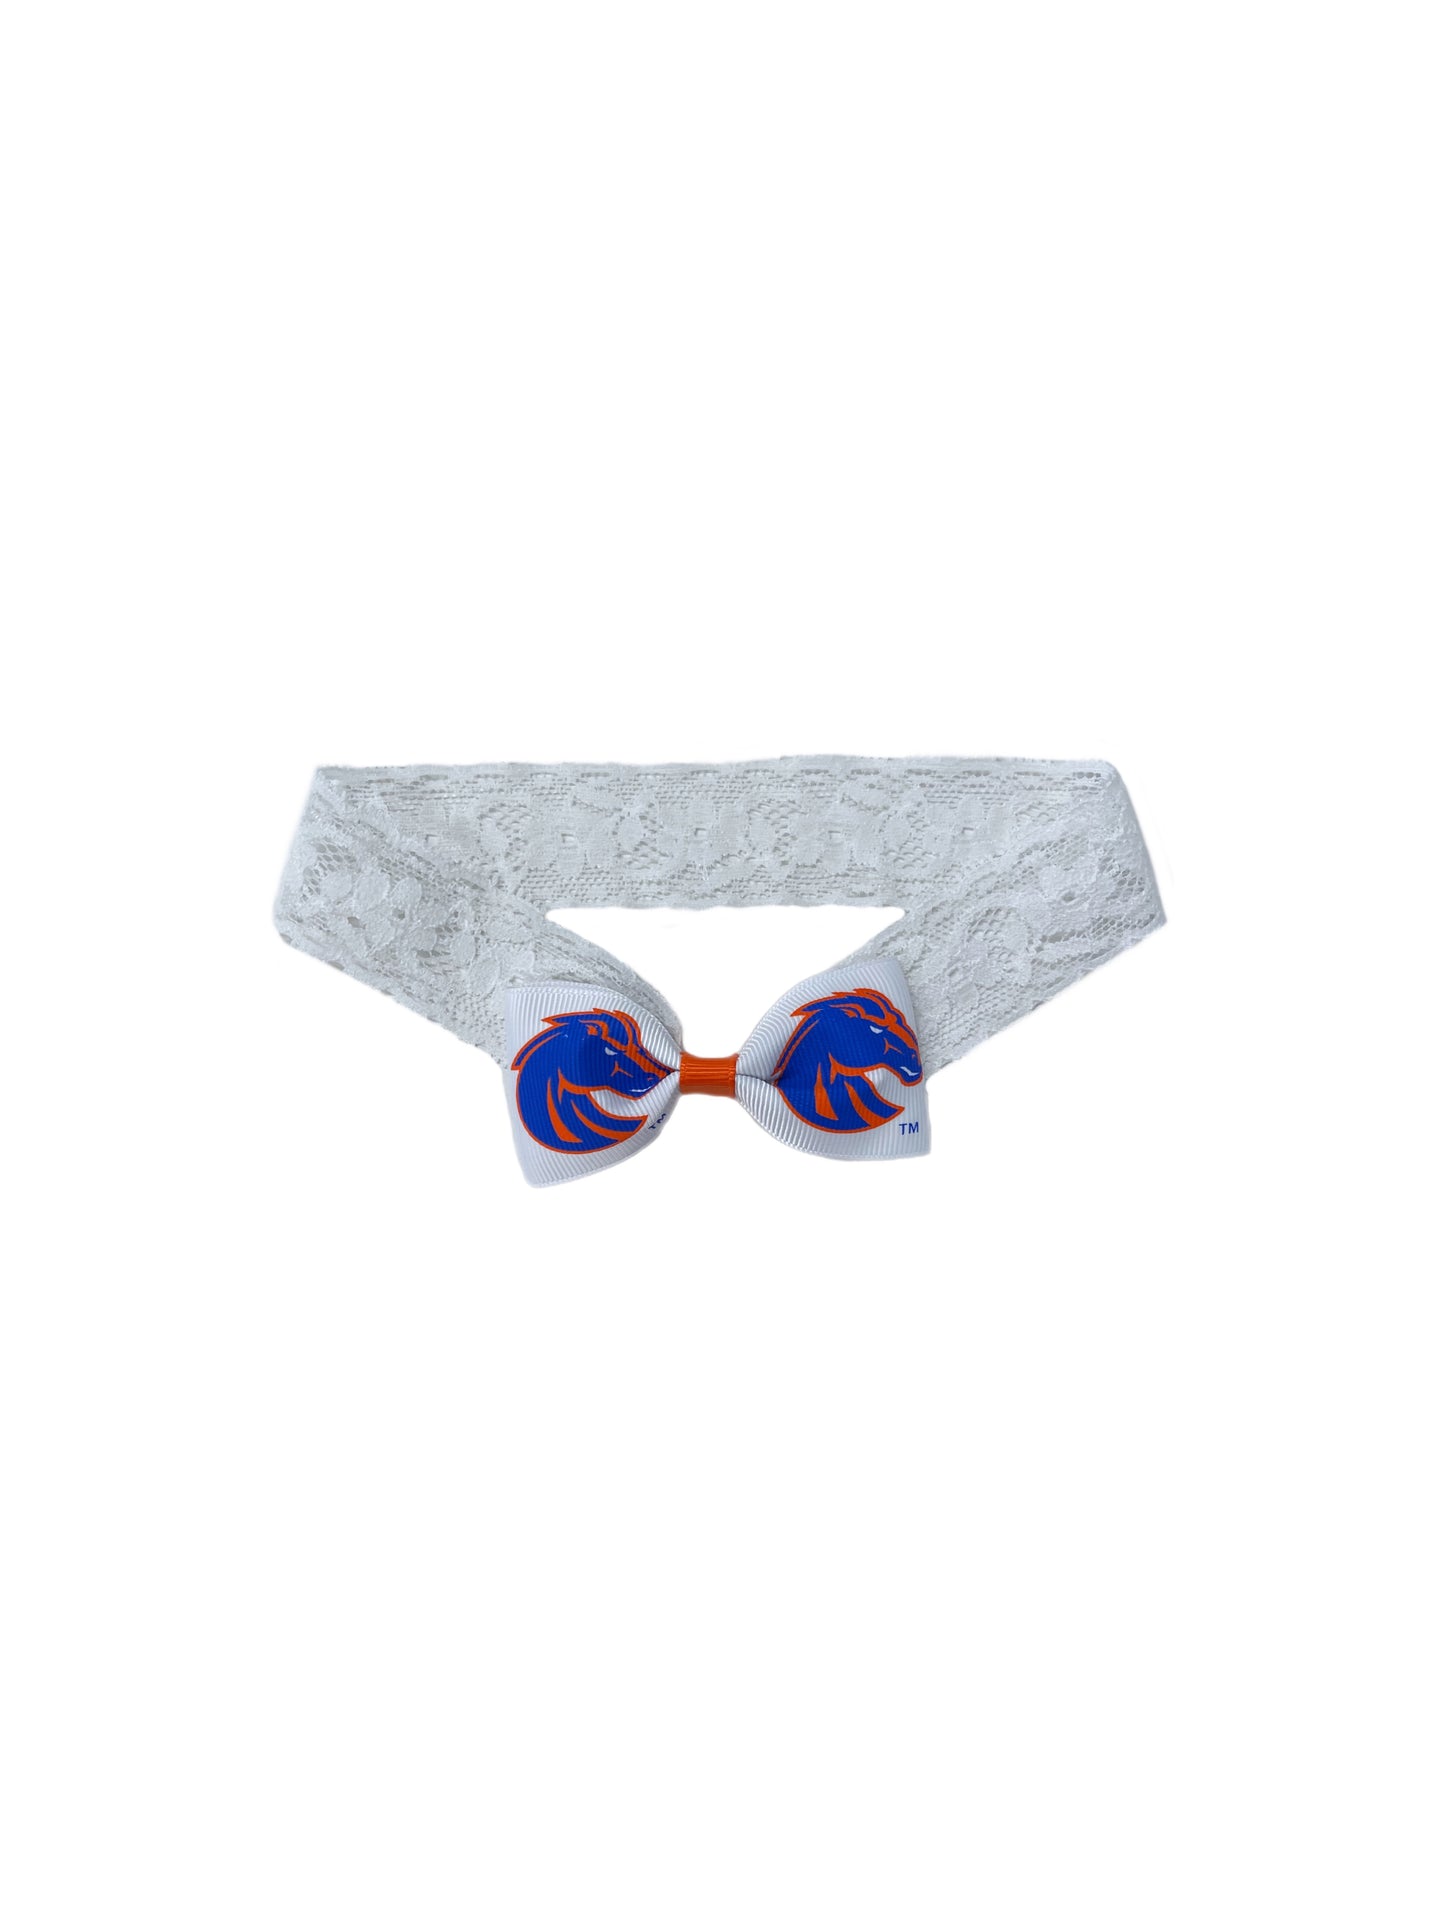 Boise State Broncos USA Bows Baby Head Band Bow (White)